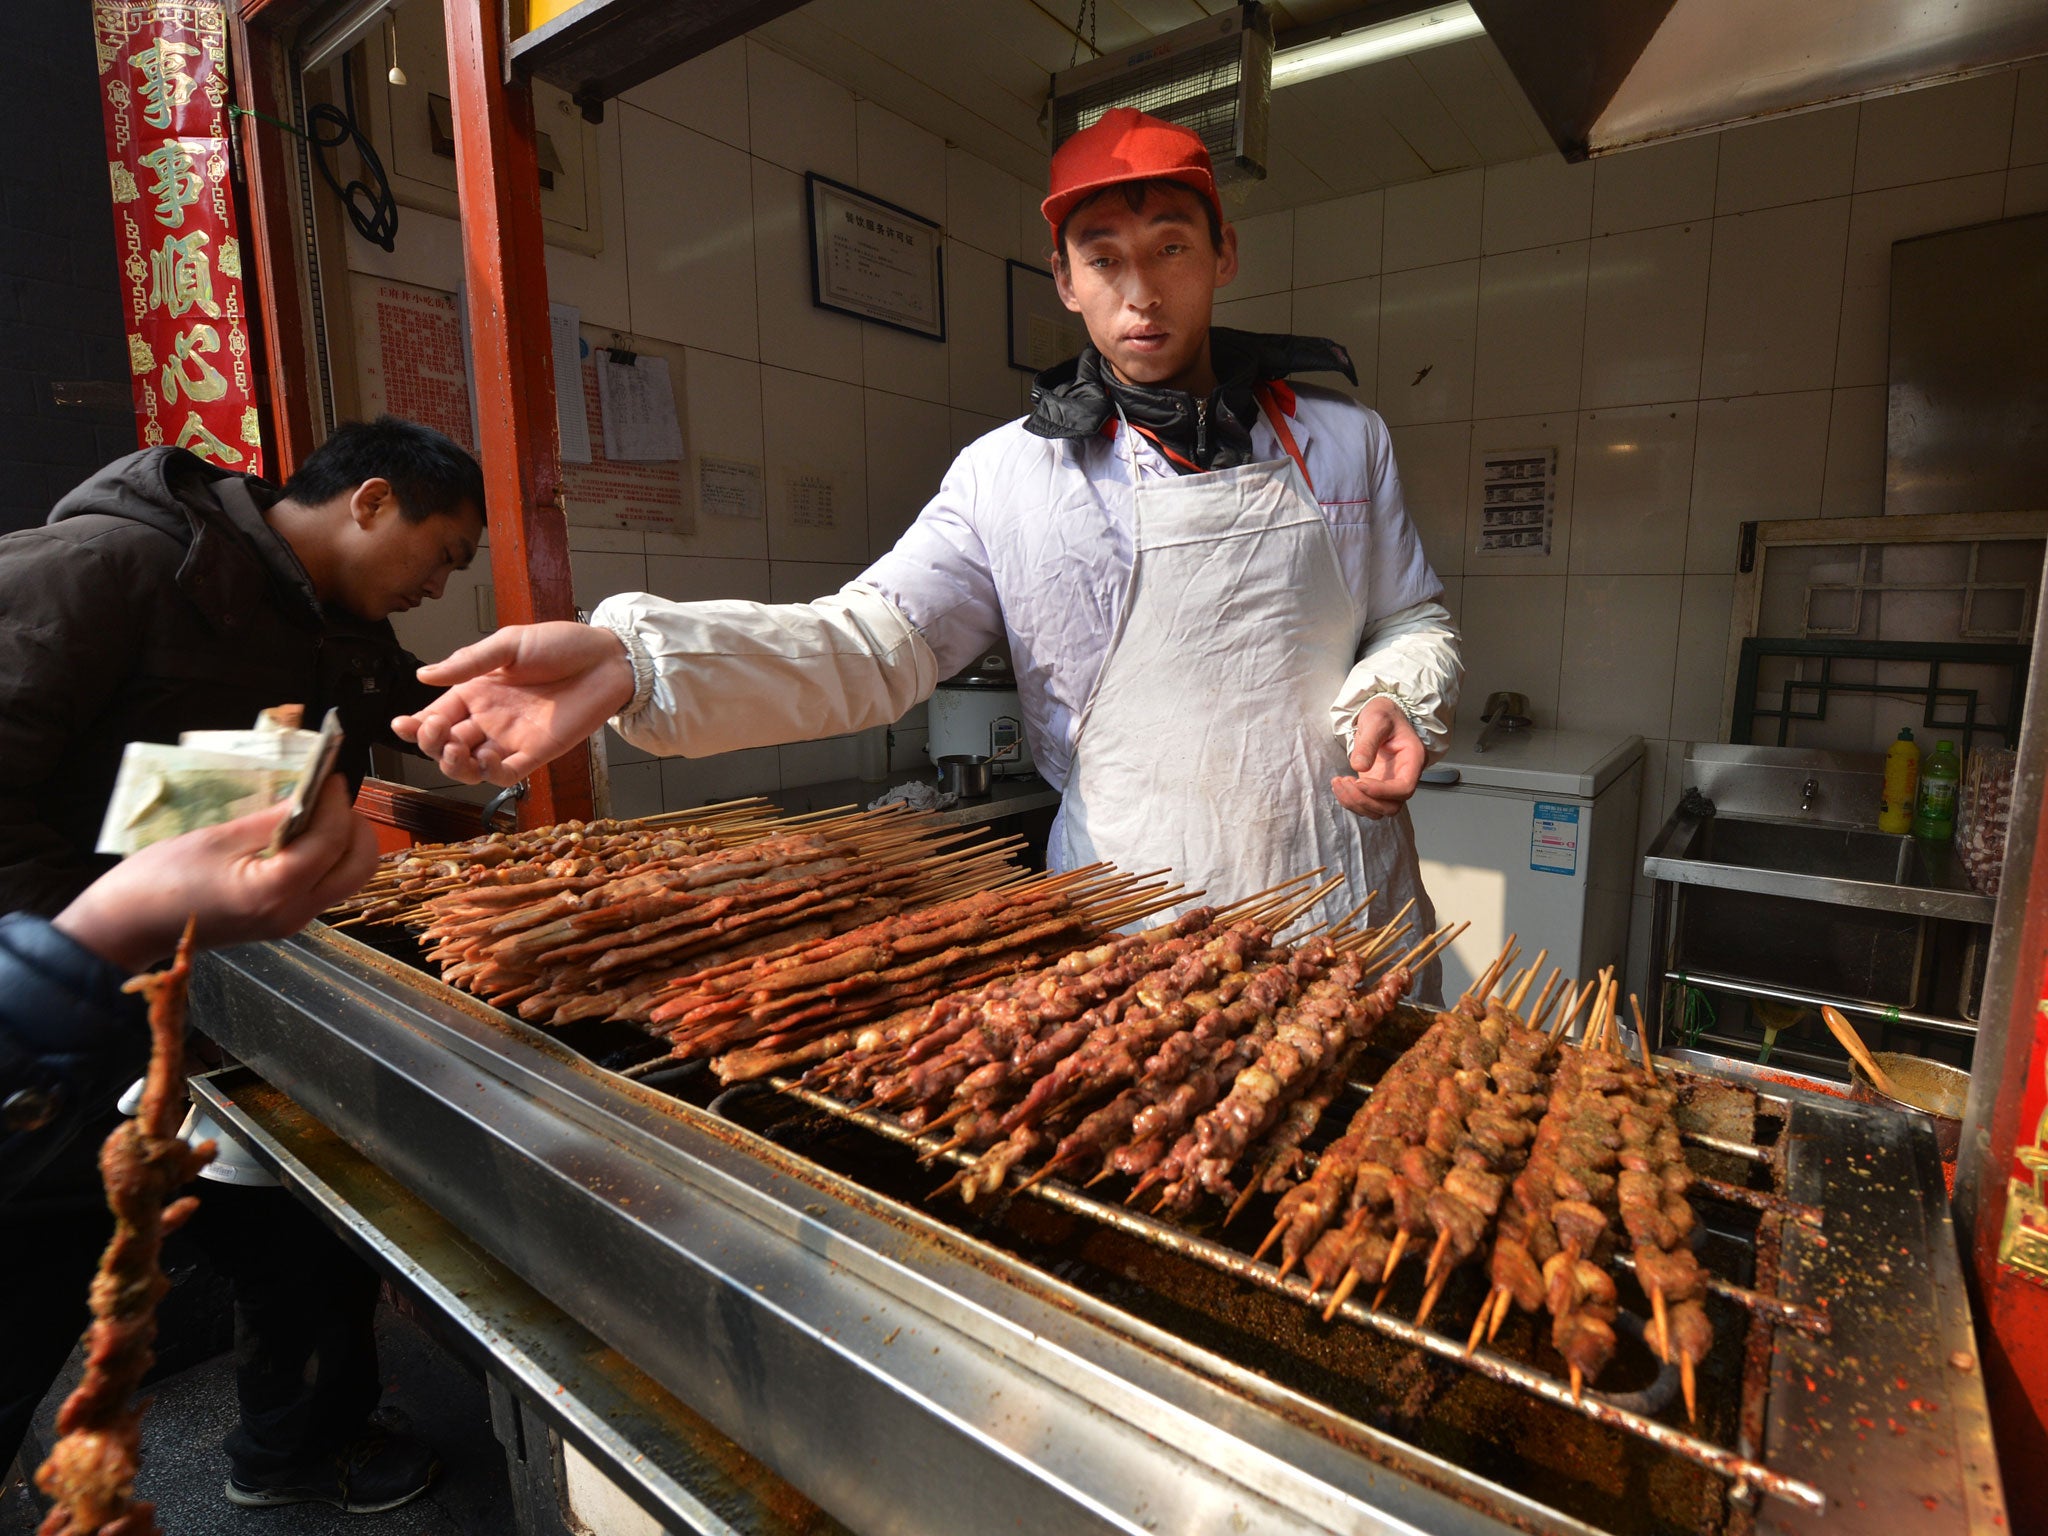 Hawkers selling barbecued goods like these lamb kebabs may be a thing of the past if the government goes ahead with the barbecue ban